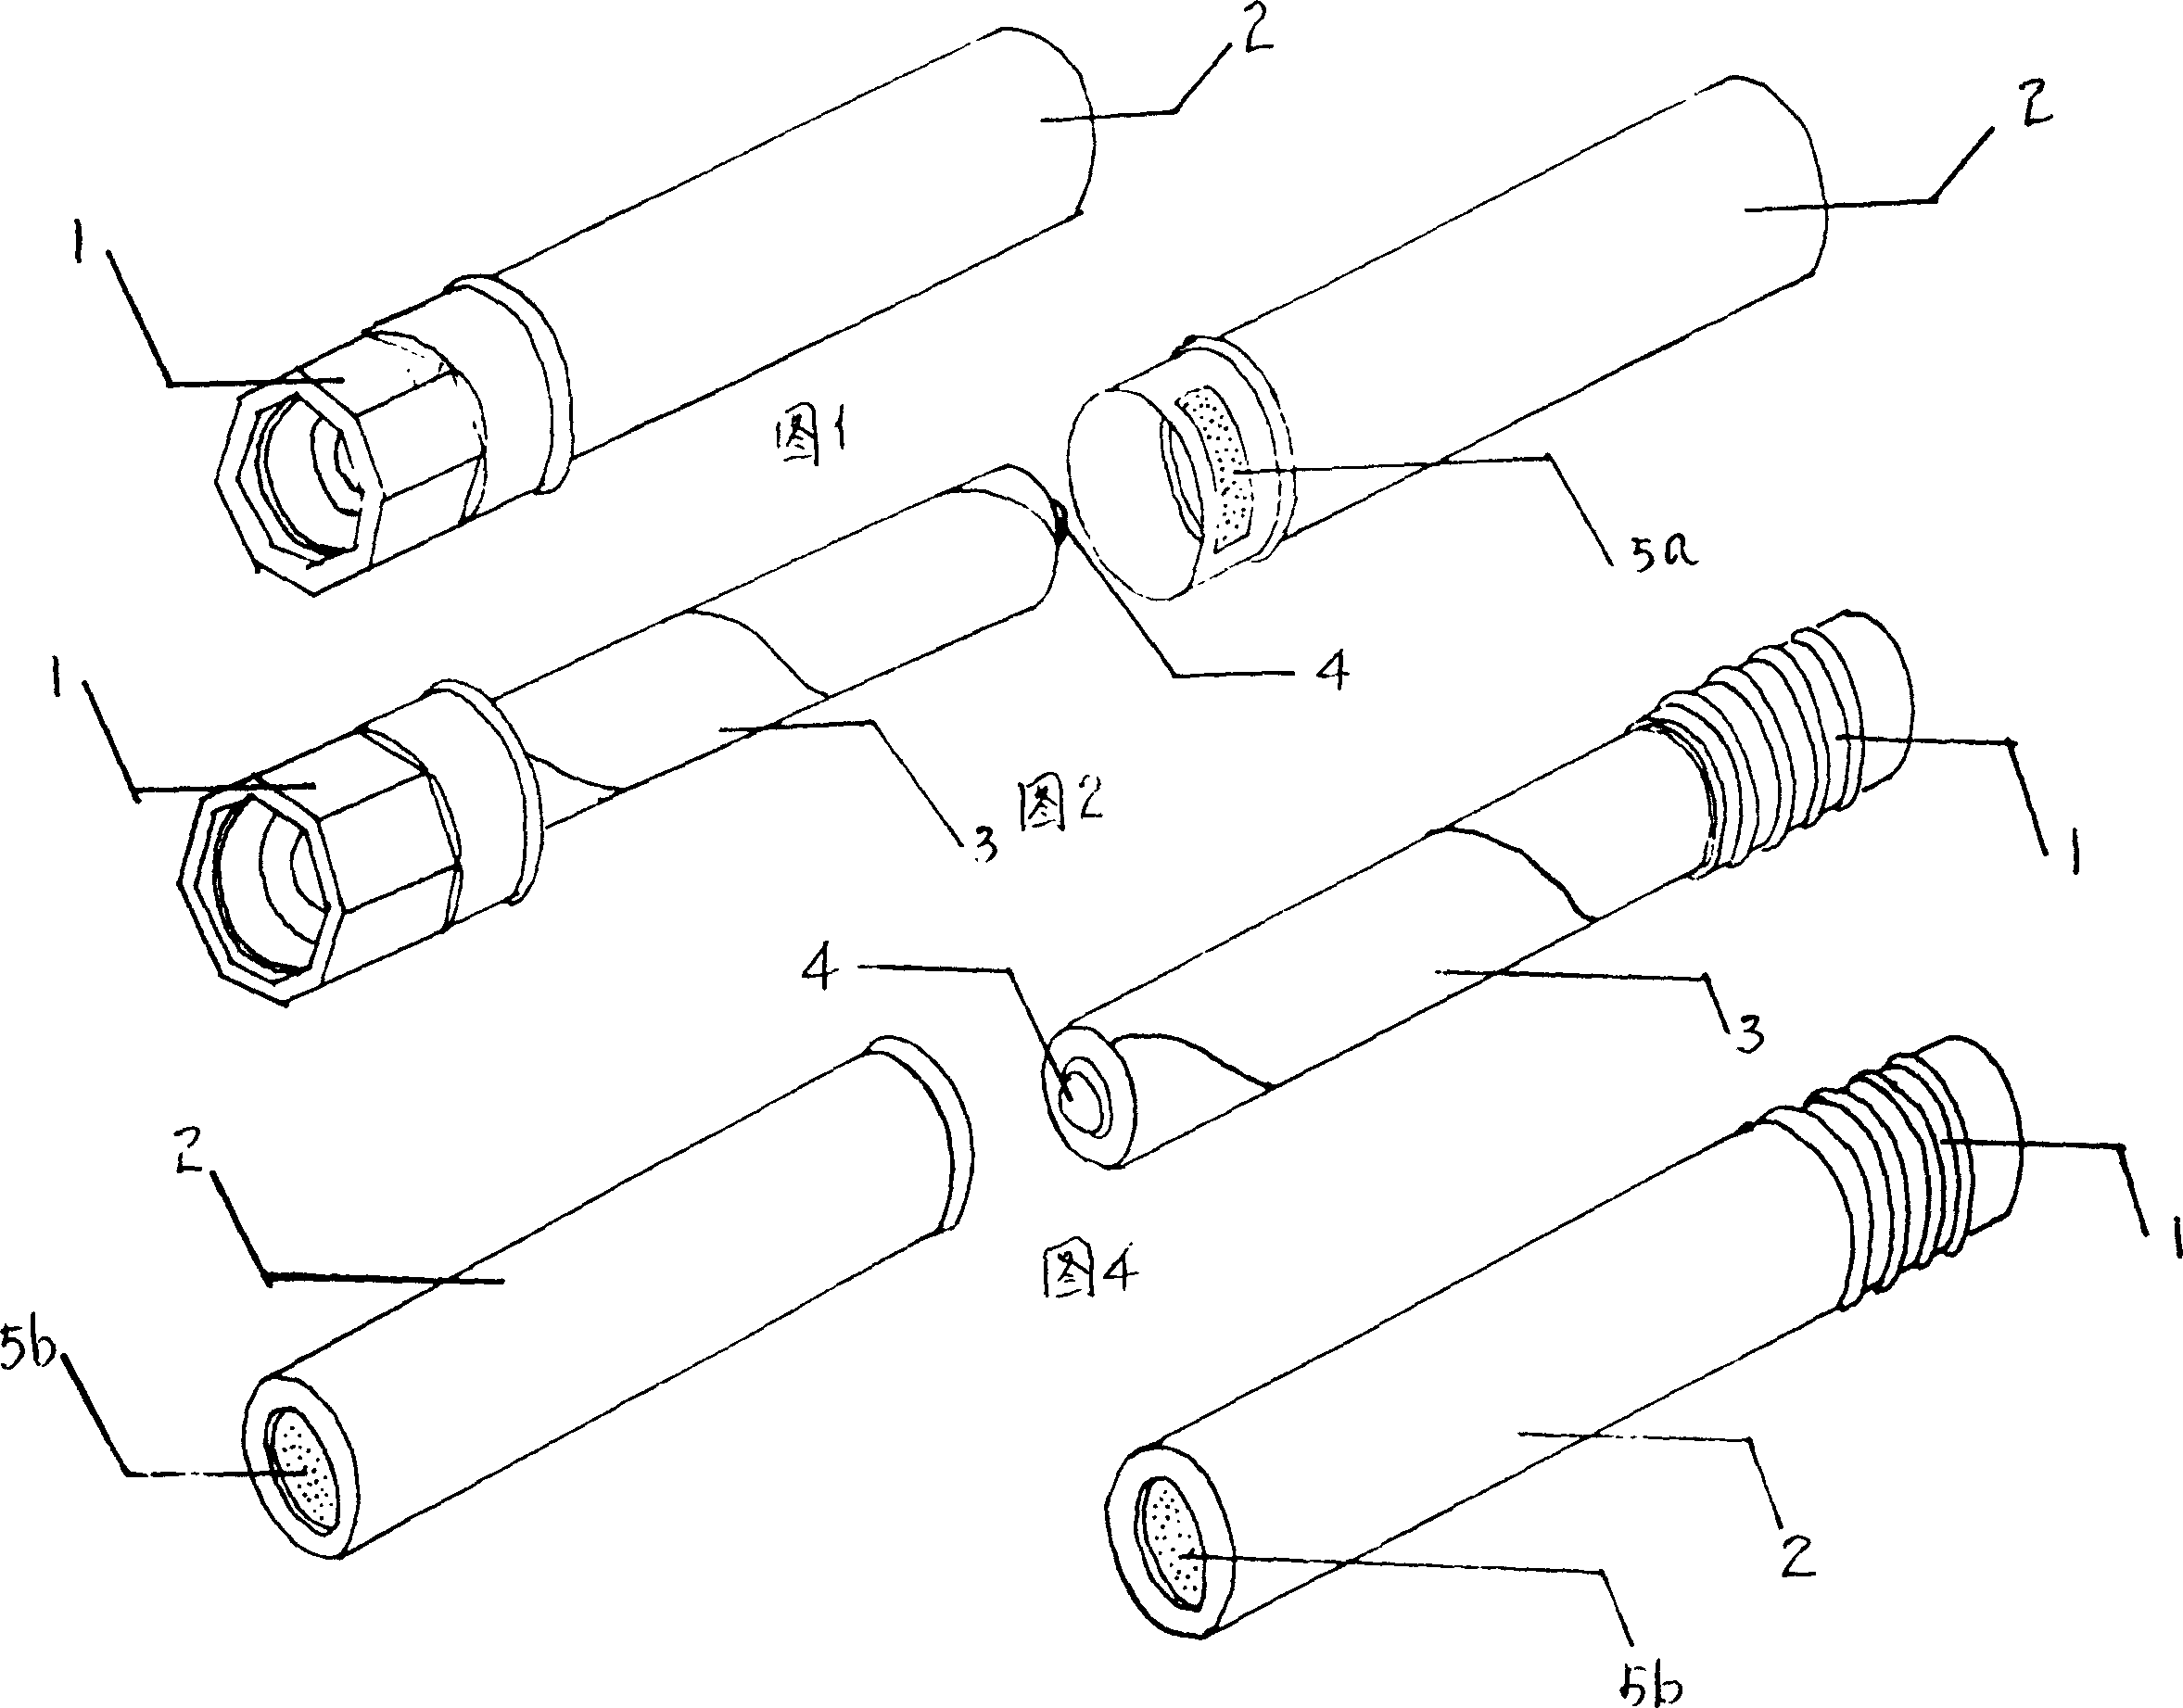 Flame tube for emergent warning motor vehicle and its formulation